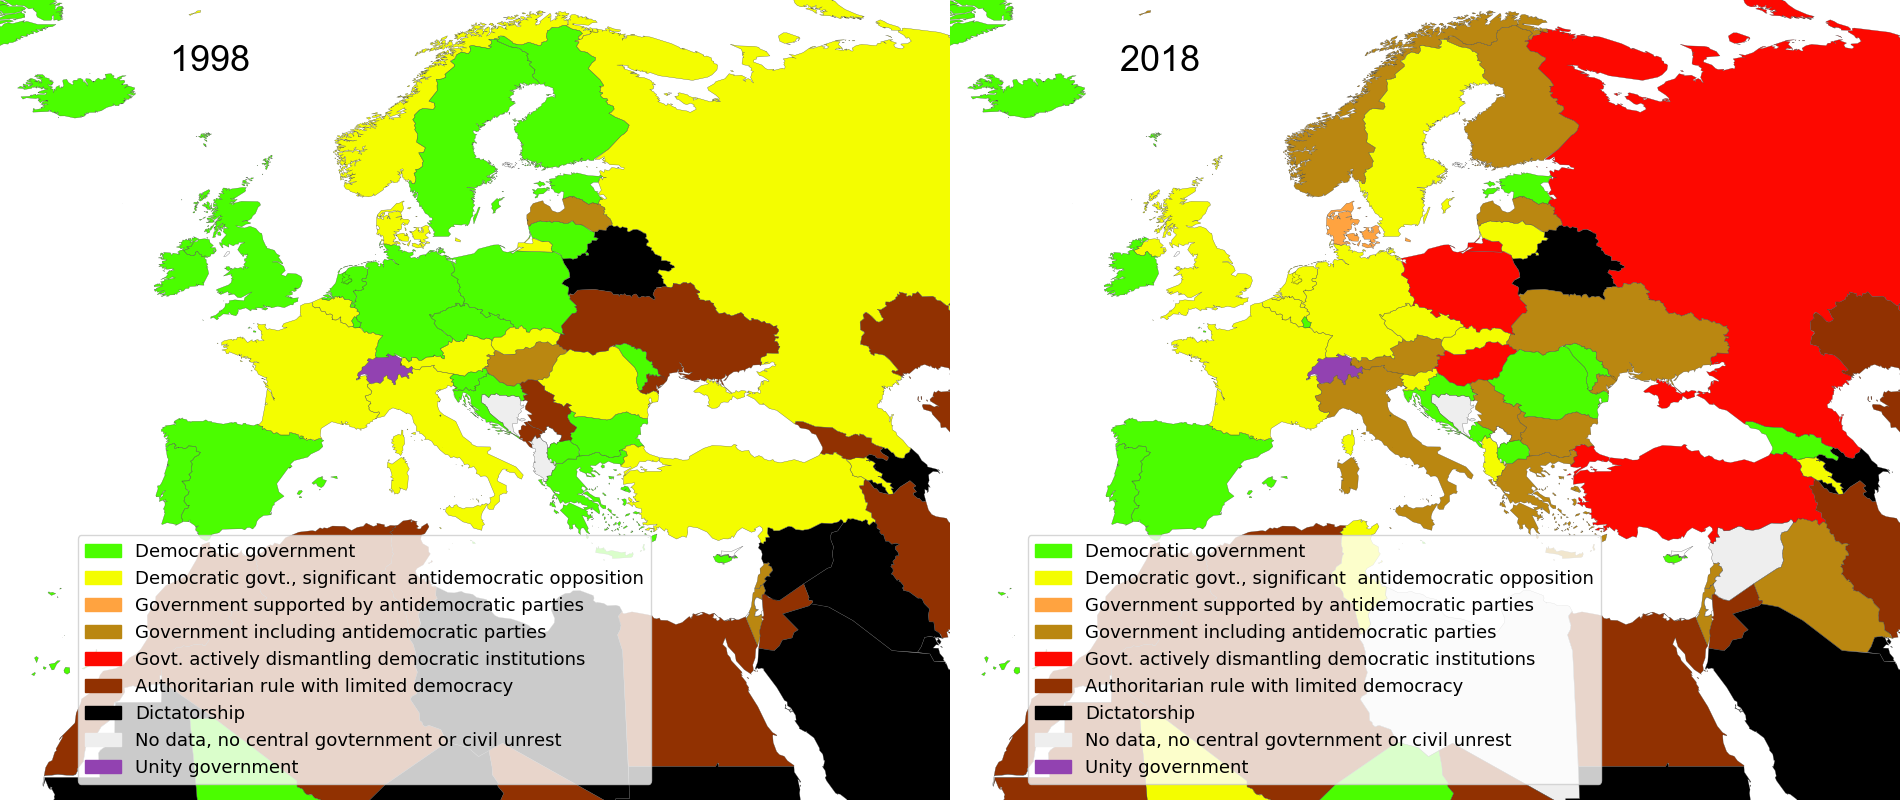 State of democracies in Europe and surrounding regions in 1998 and in 2018